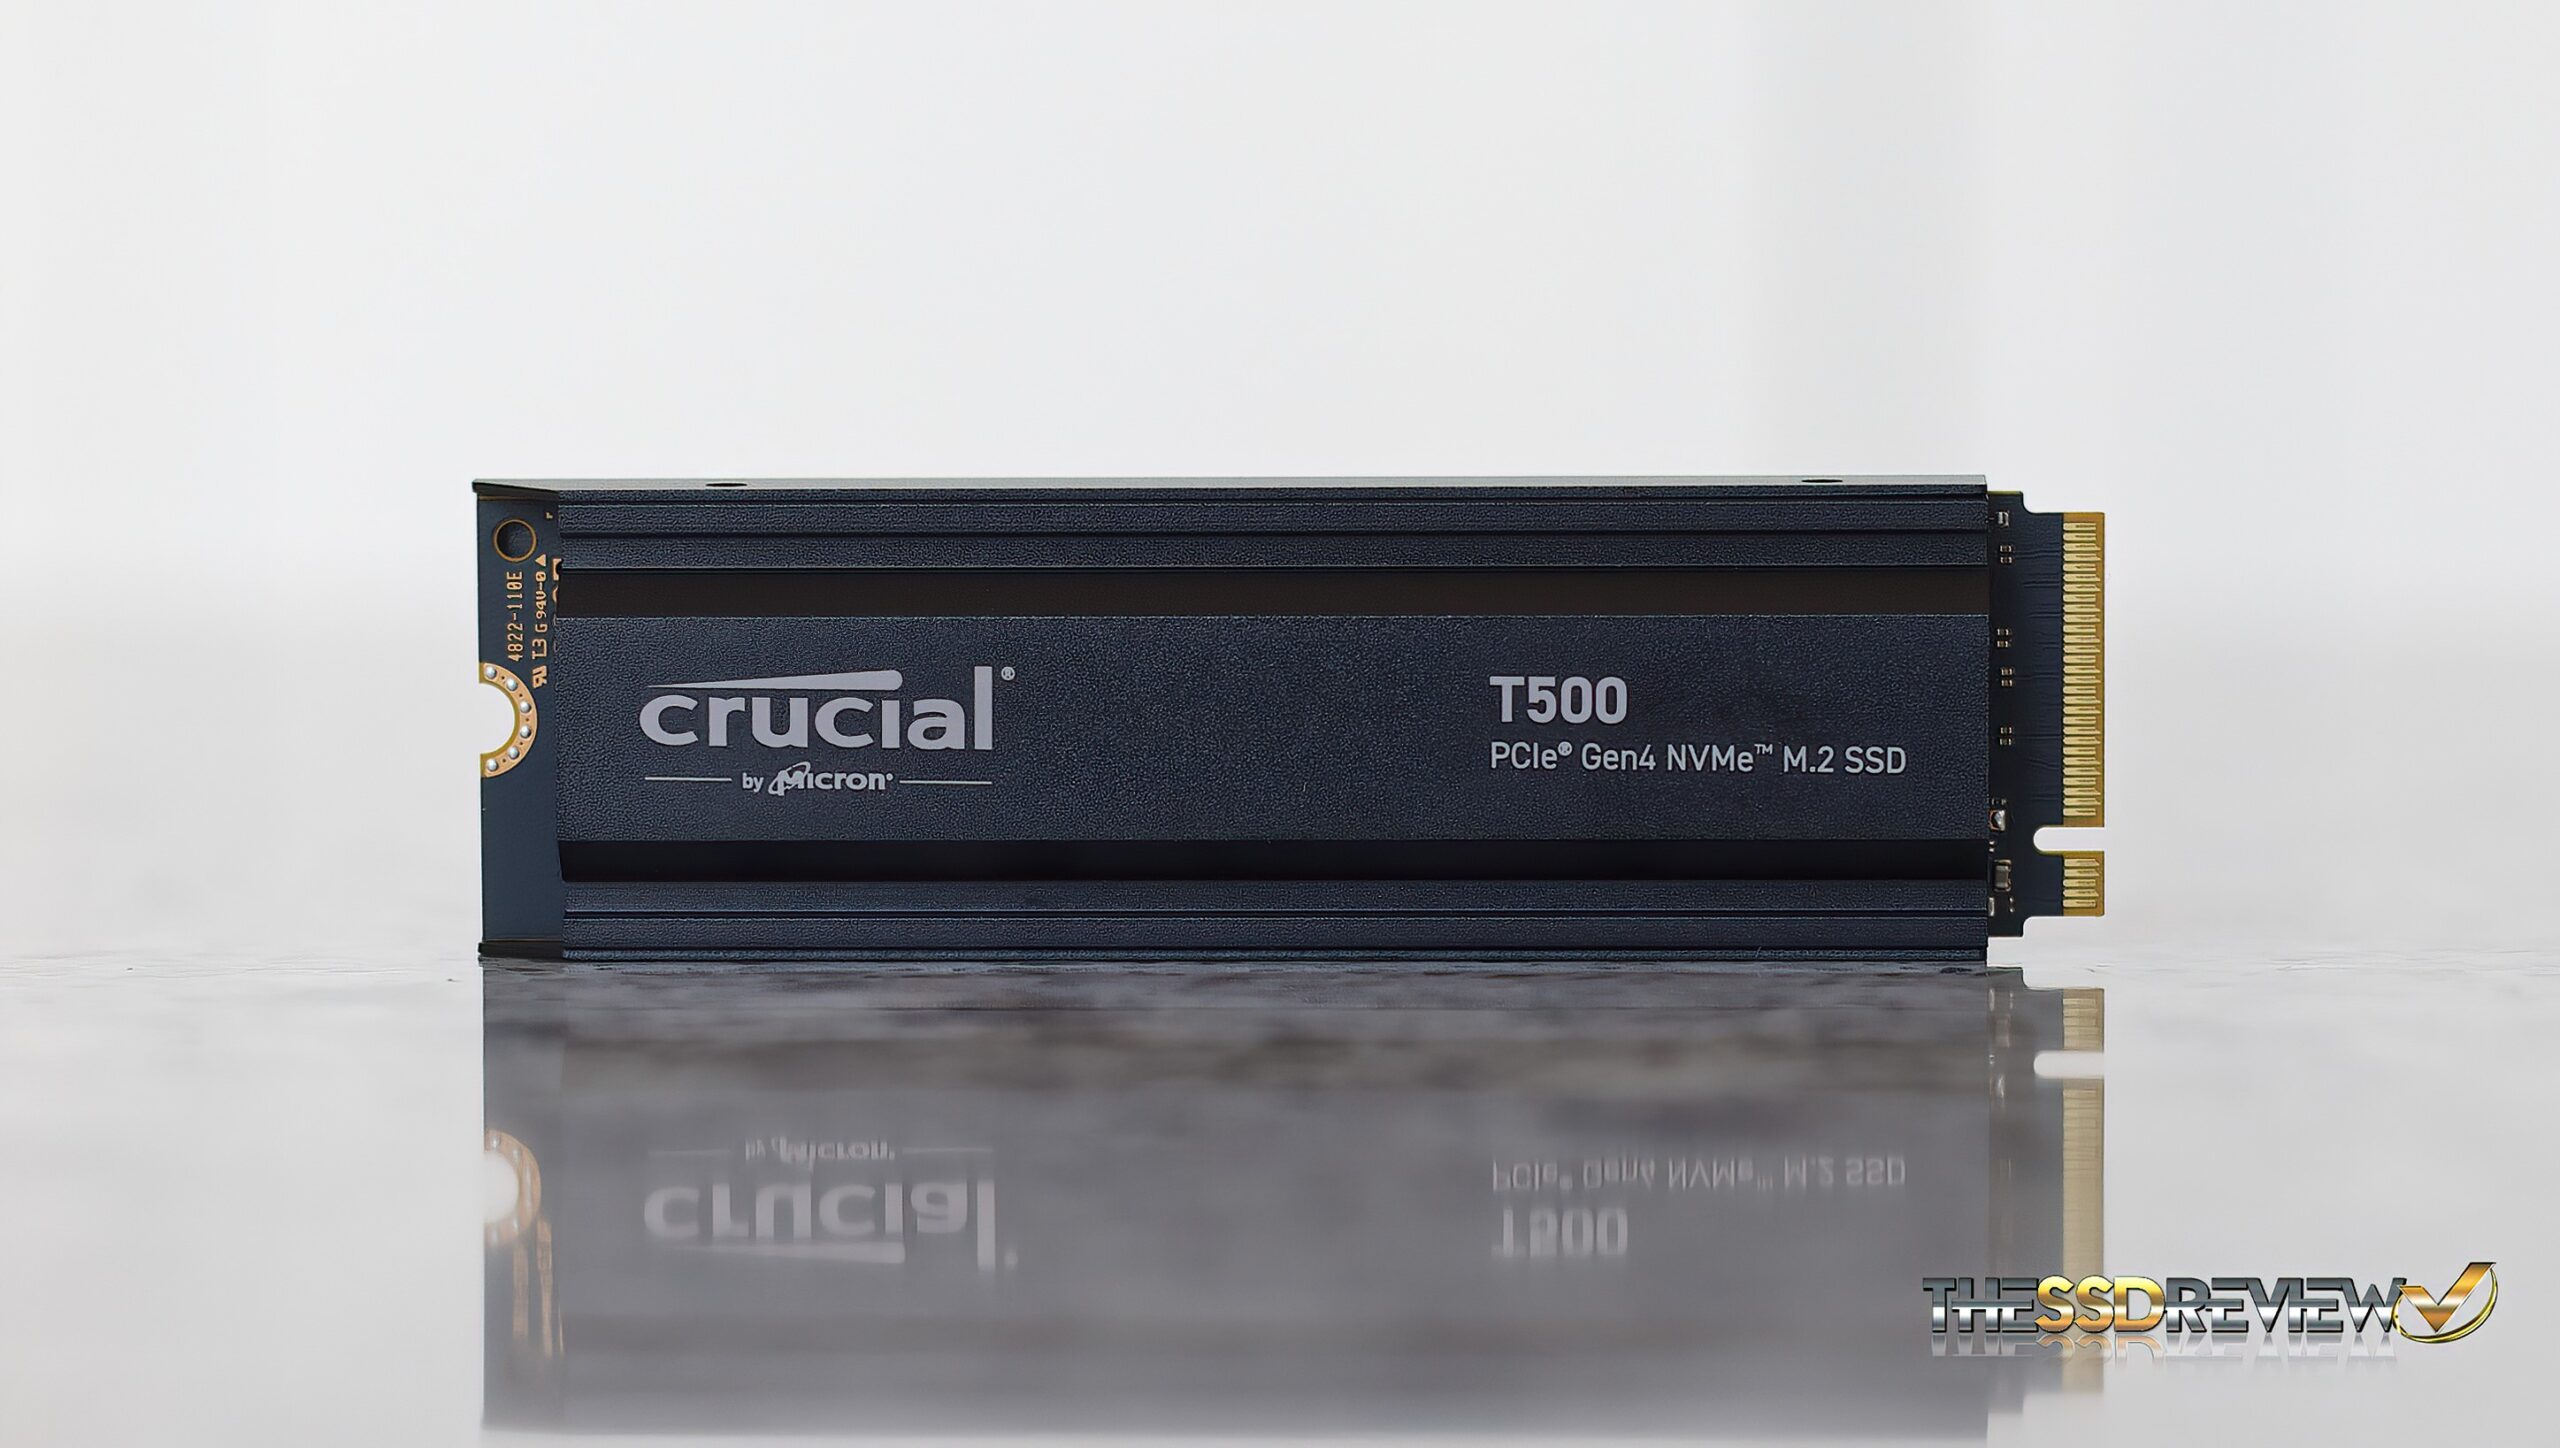 Be quick to get Crucial's new T500 2TB SSD in this limited time